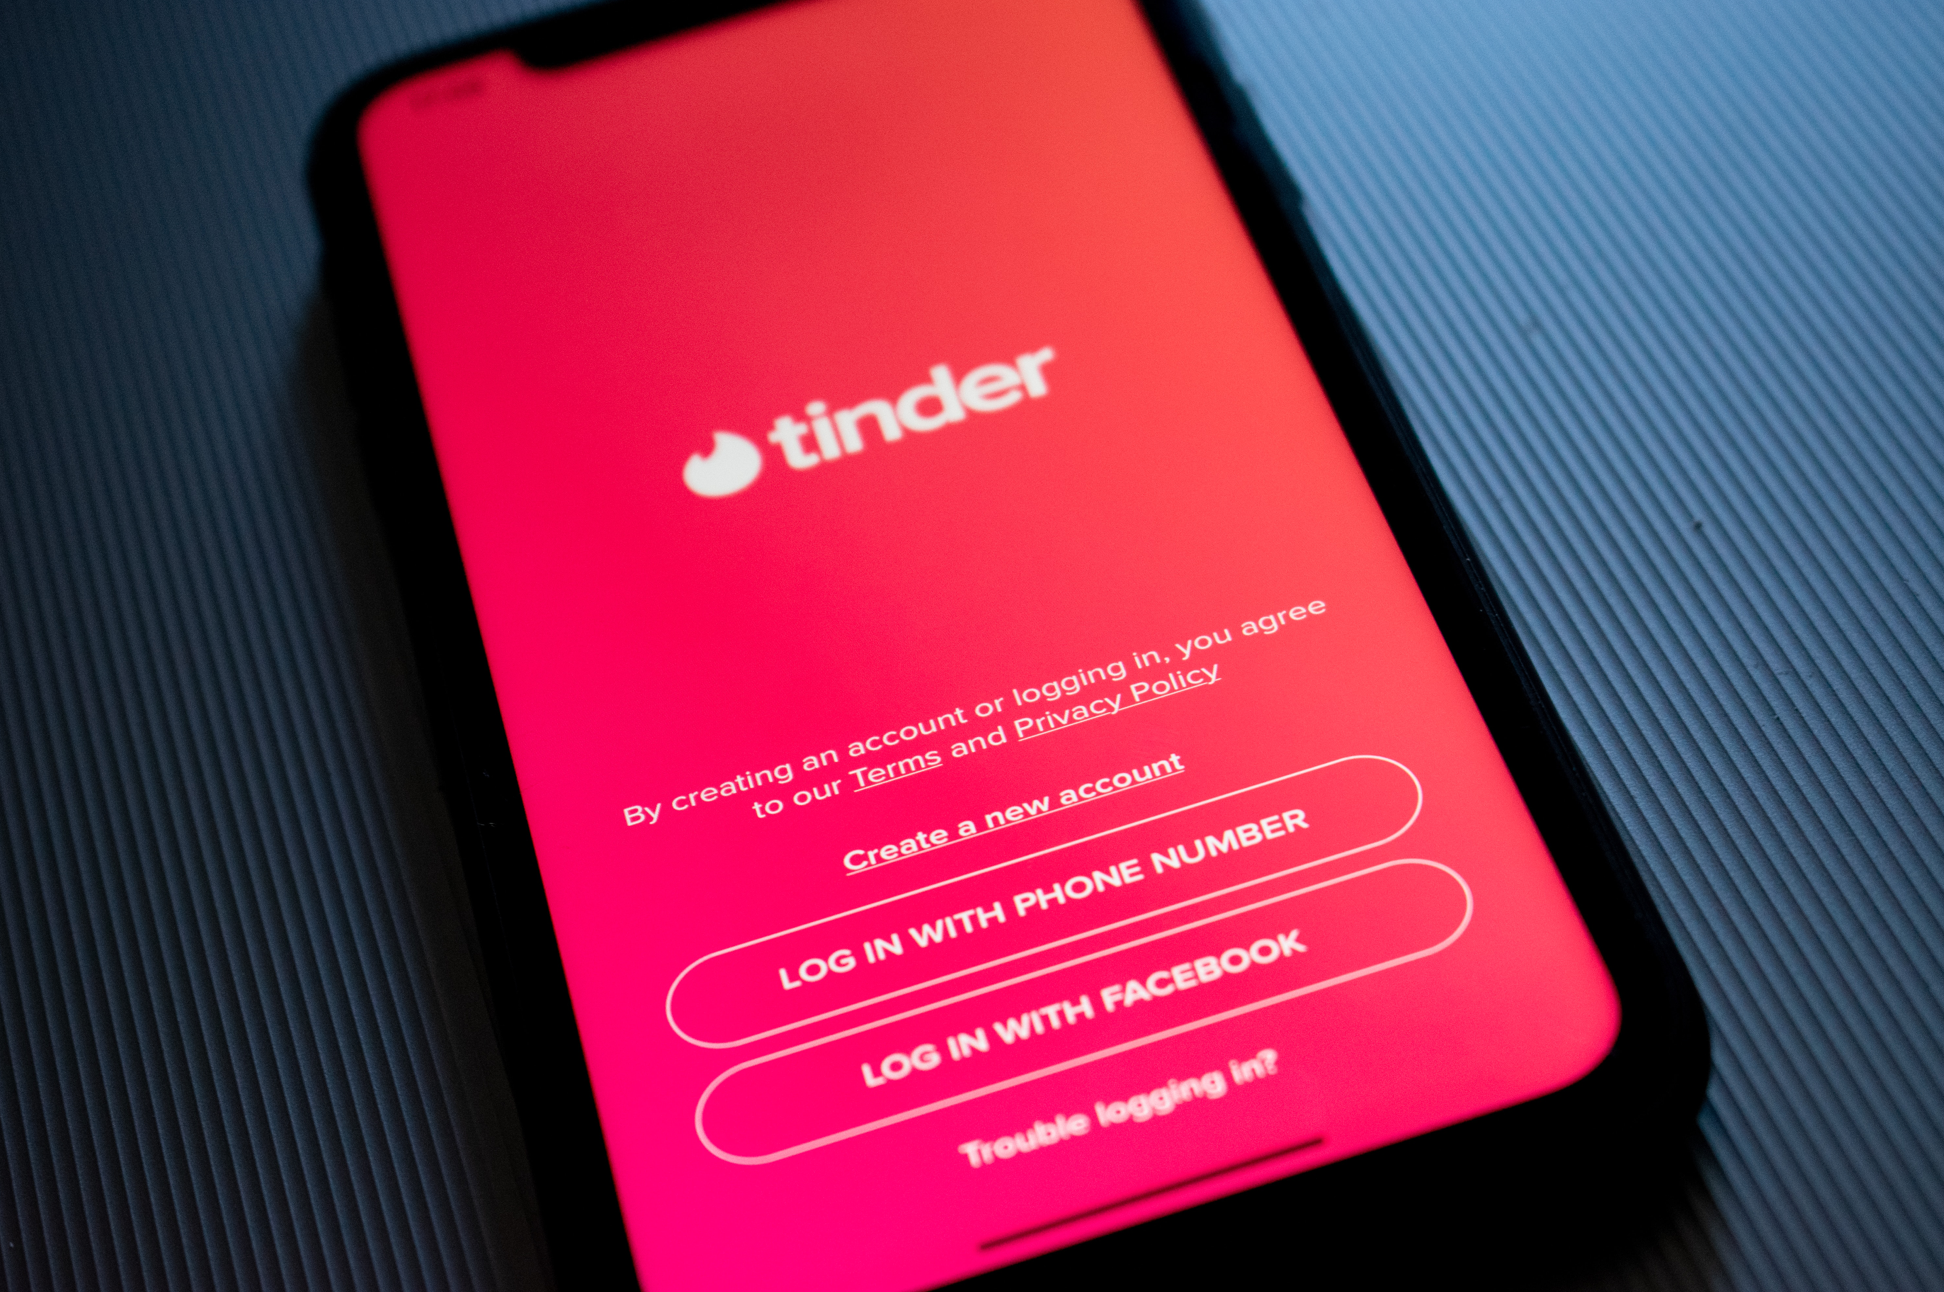 Tinder: the app that's changing the way singletons meet and fall in love